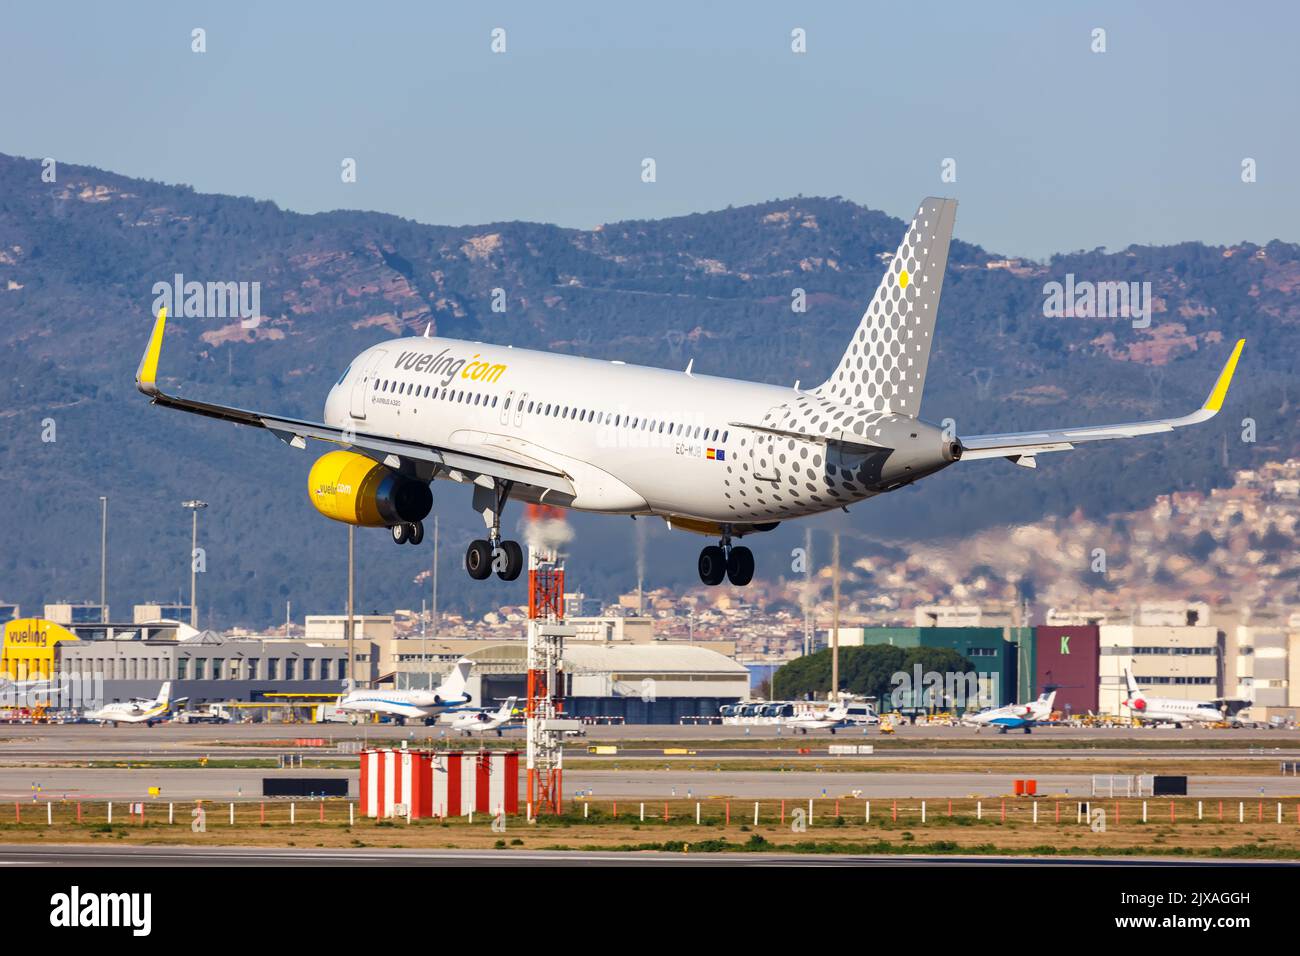 Barcelona, Spain - February 21, 2022: Vueling Airbus A320 airplane at Barcelona airport (BCN) in Spain. Stock Photo